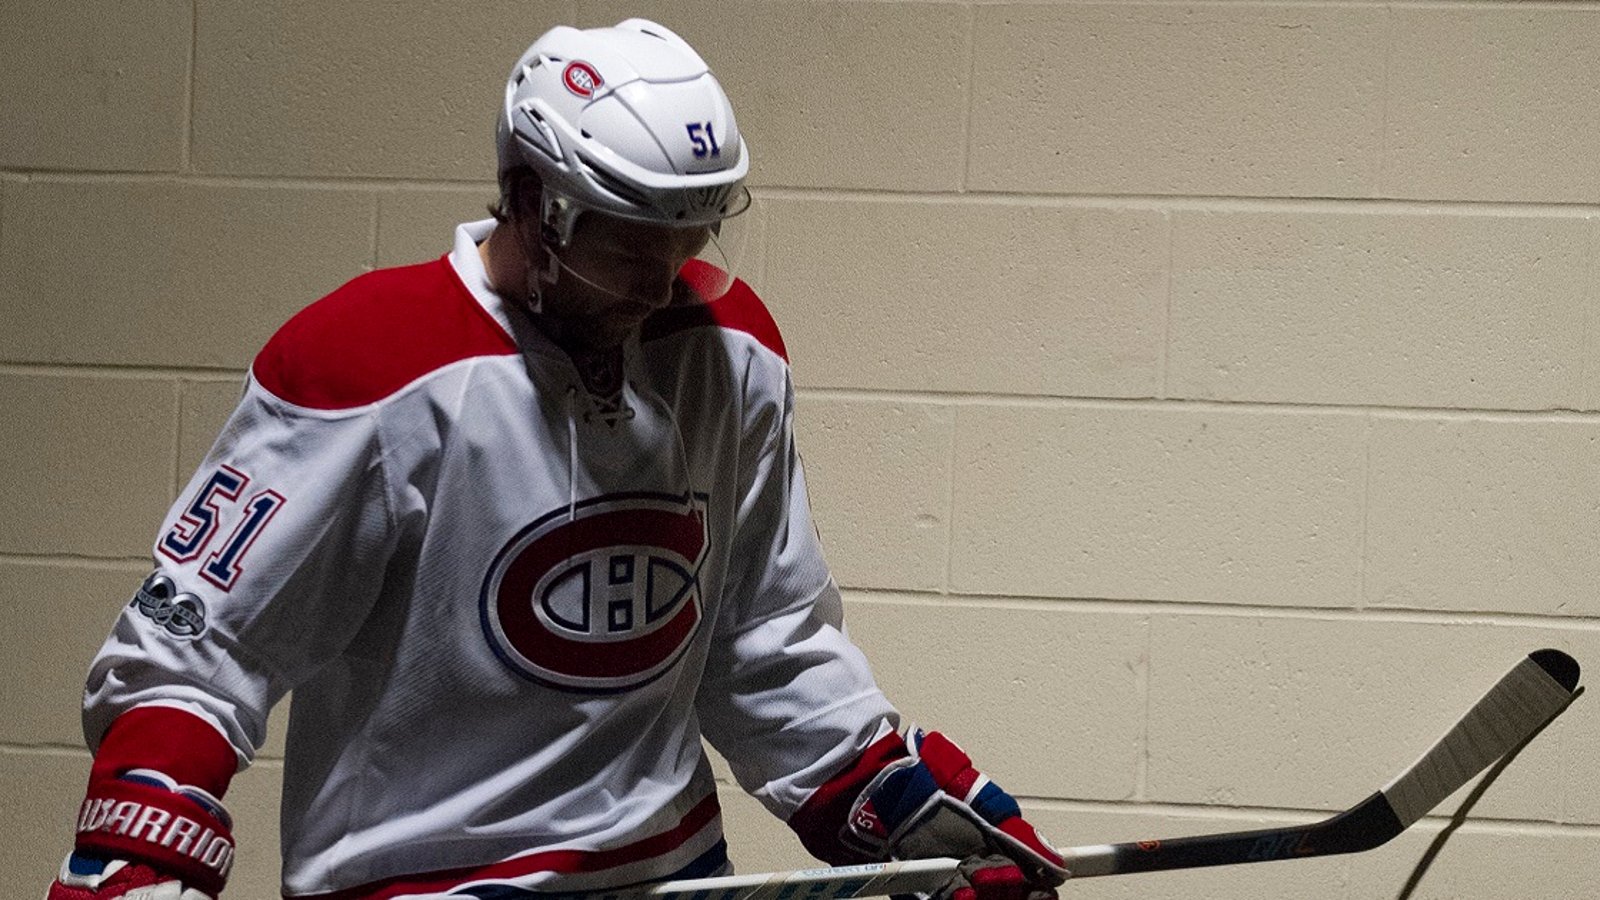 Rangers sign former Habs forward to short-term deal.